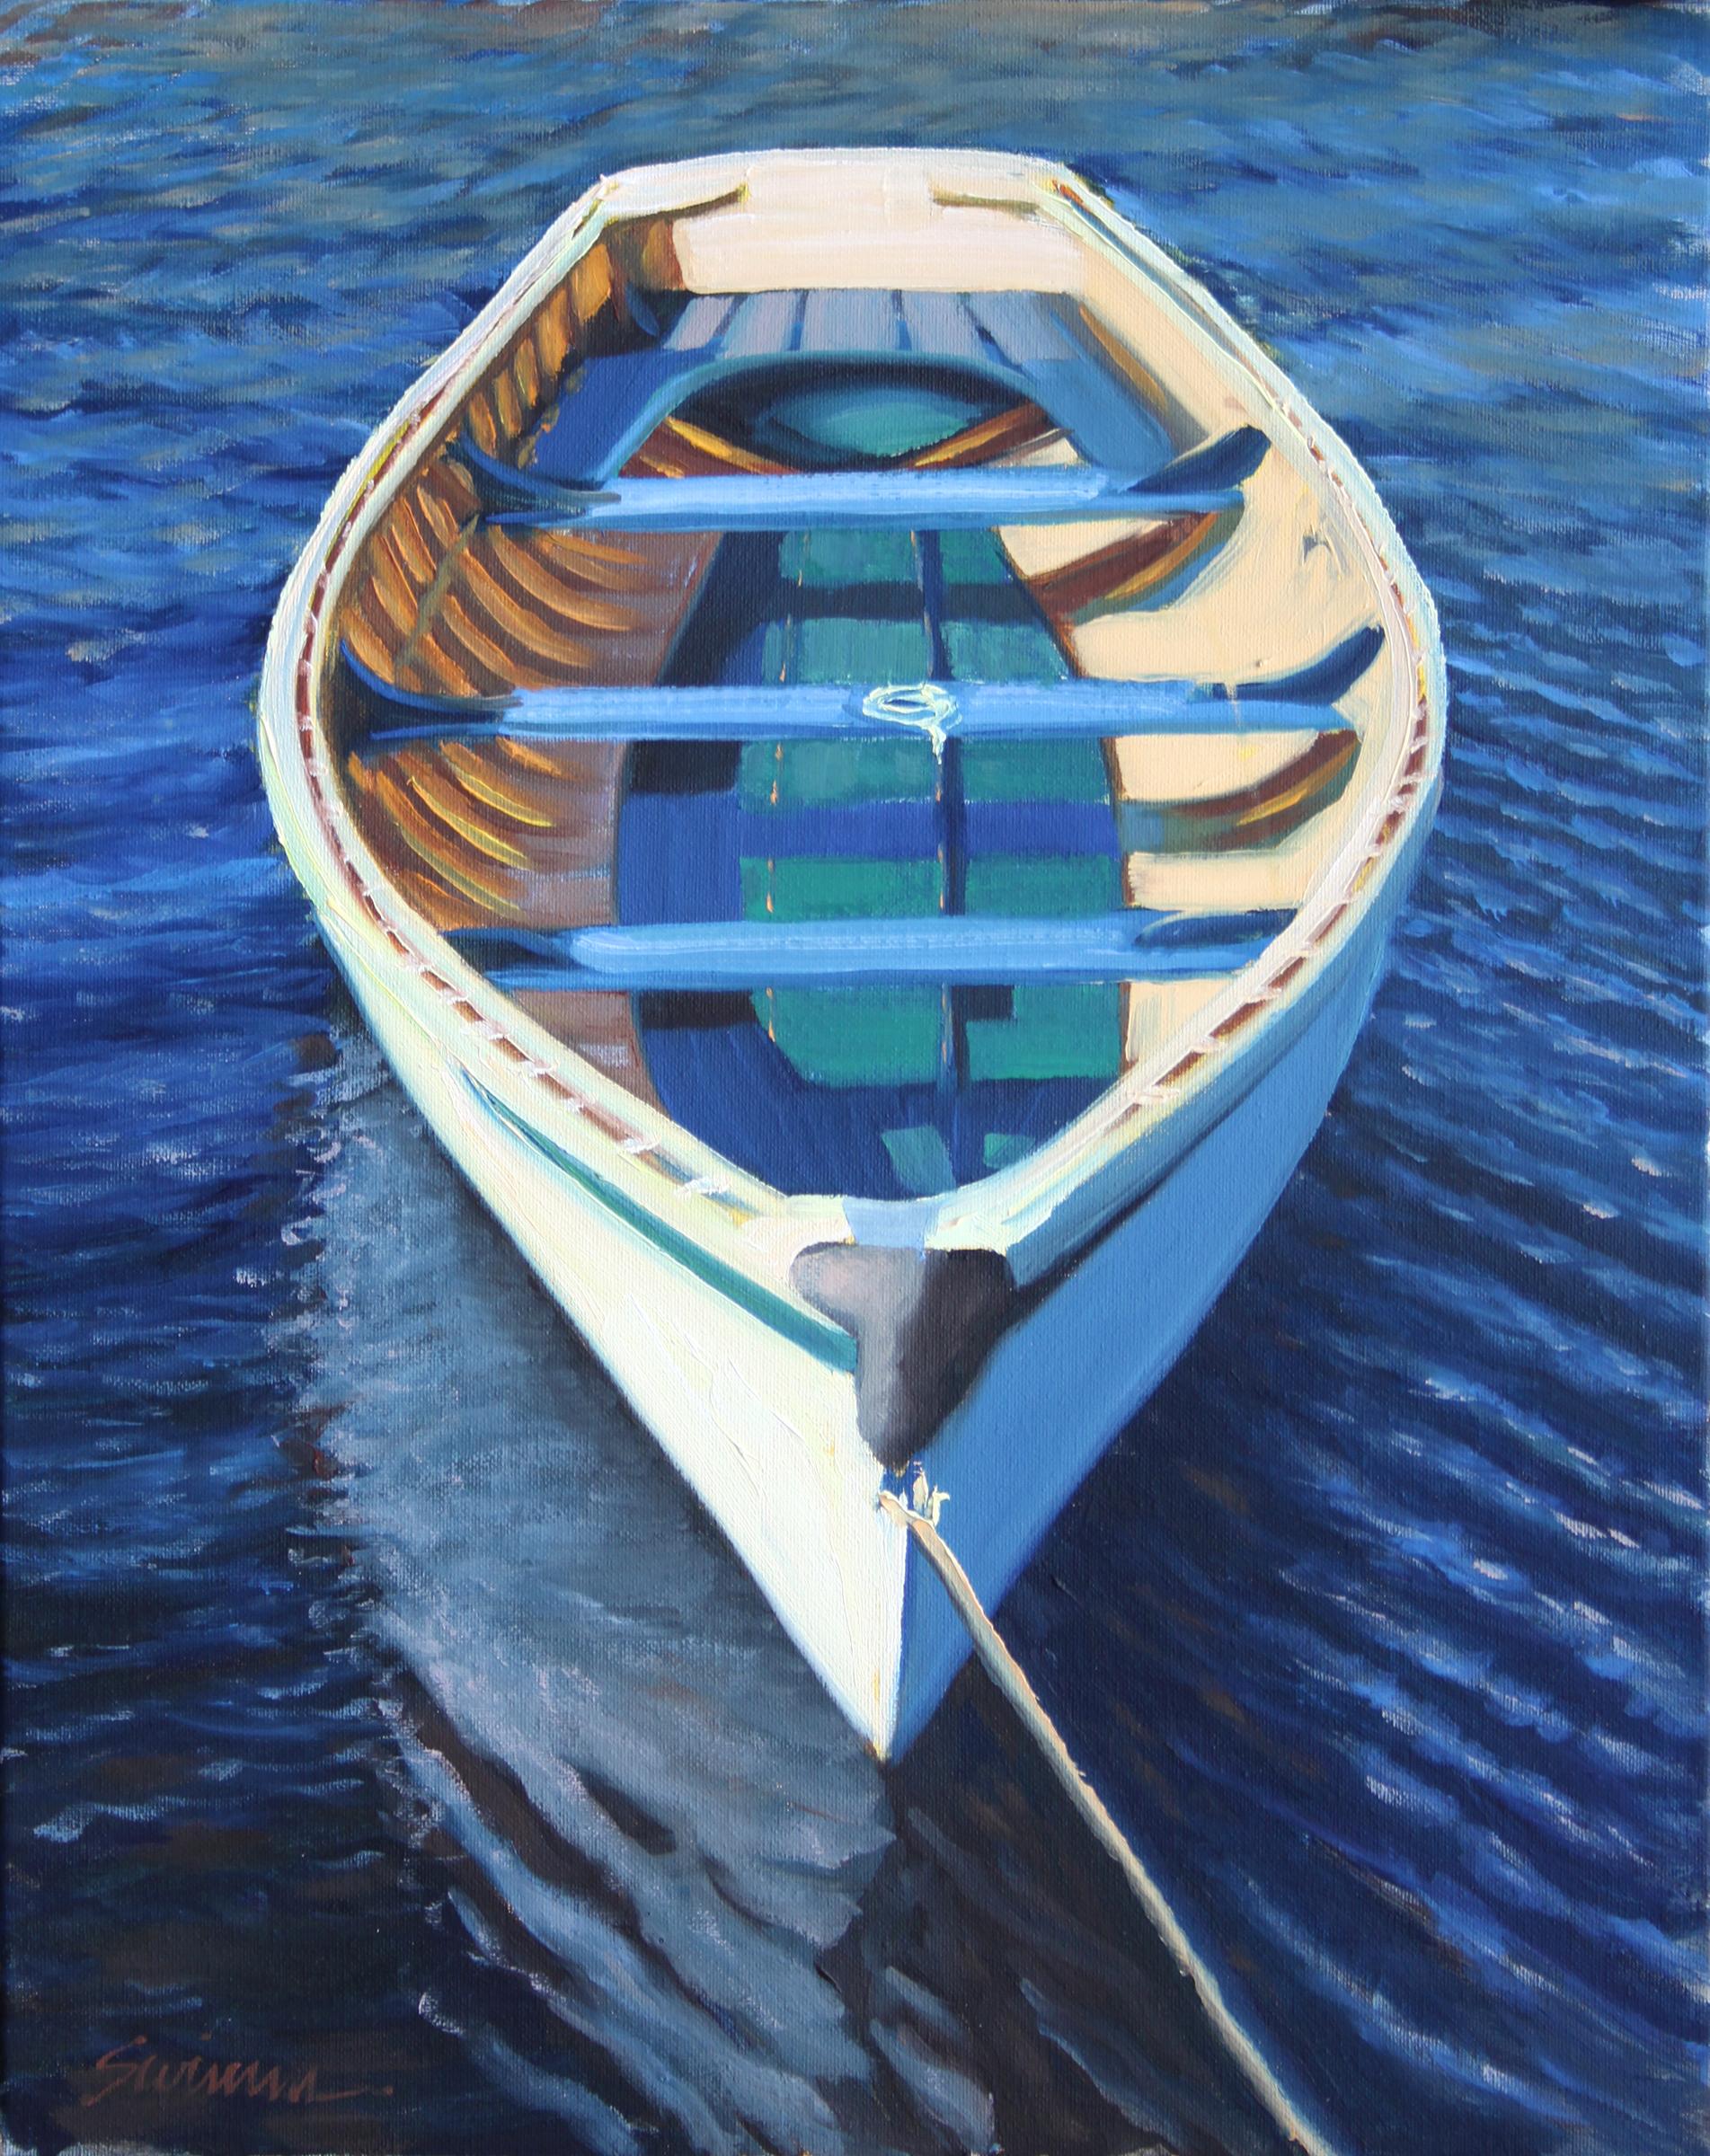 Tom Swimm Landscape Painting -  "Mystic Blues" Wooden Boat Tied Up With Glowing Water Reflections